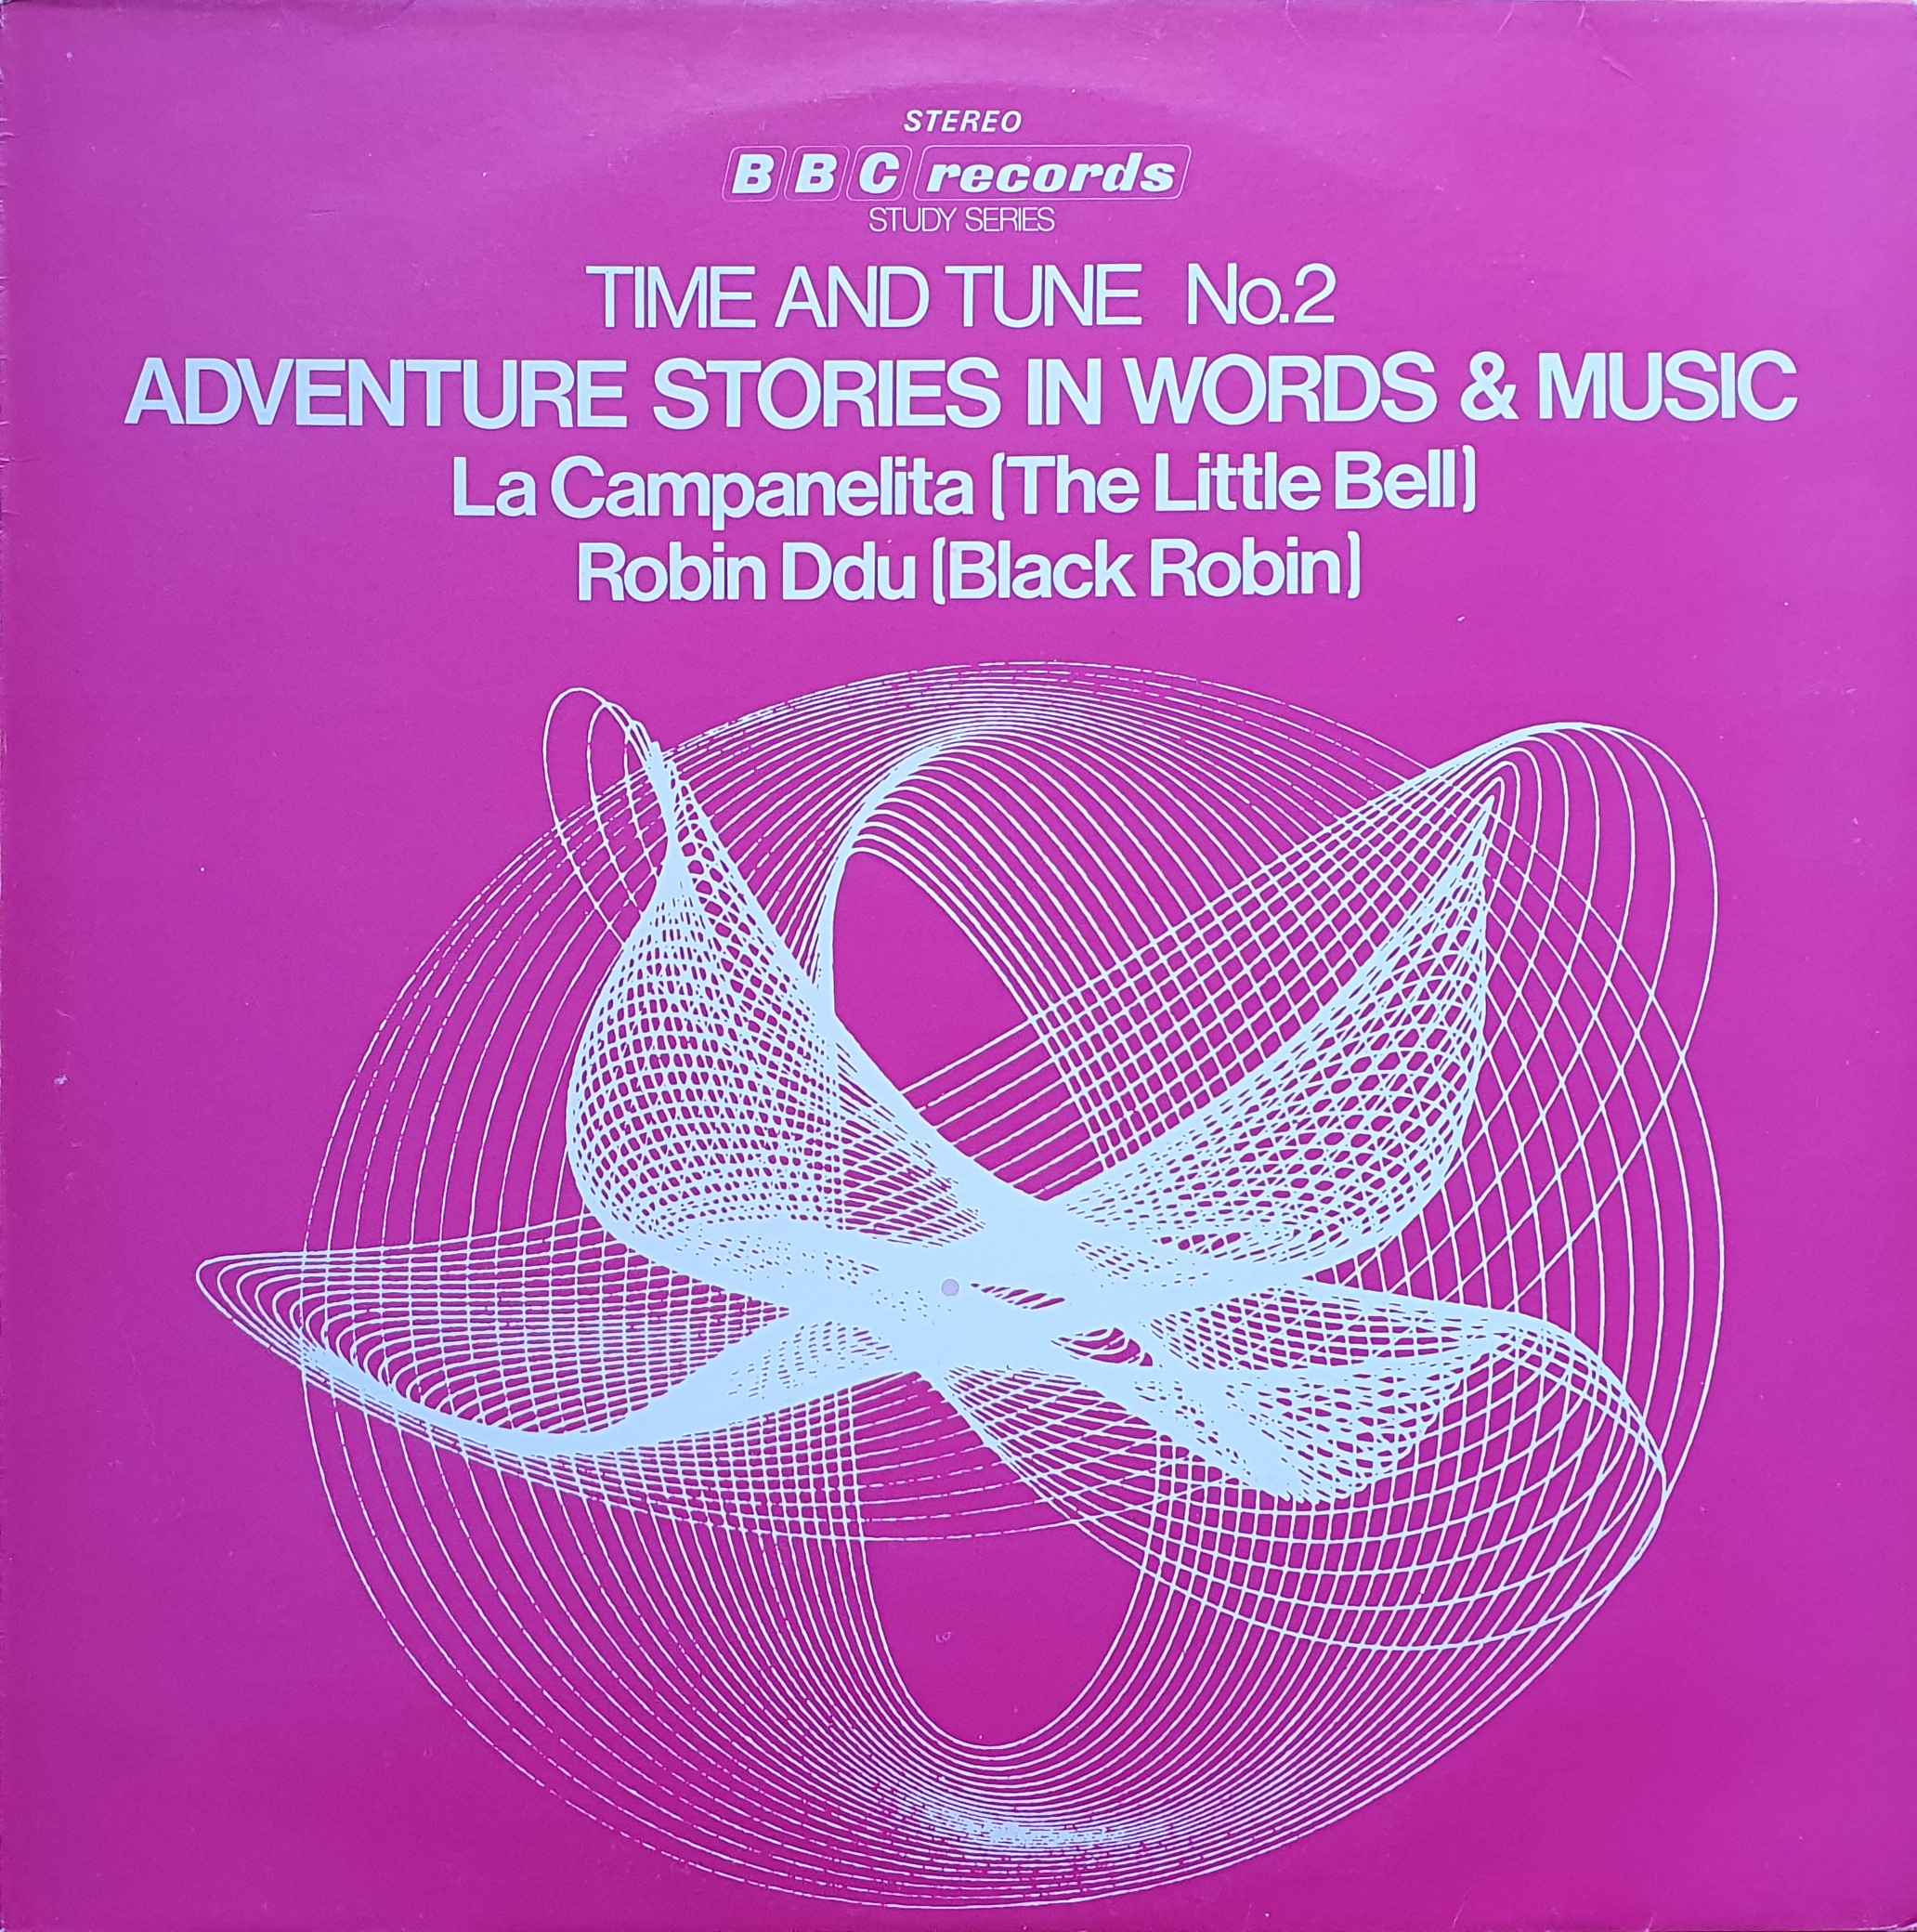 Picture of RESR 32 Time and tune no. 2 by artist John Emlyn Edwards / Douglas Coombes from the BBC albums - Records and Tapes library